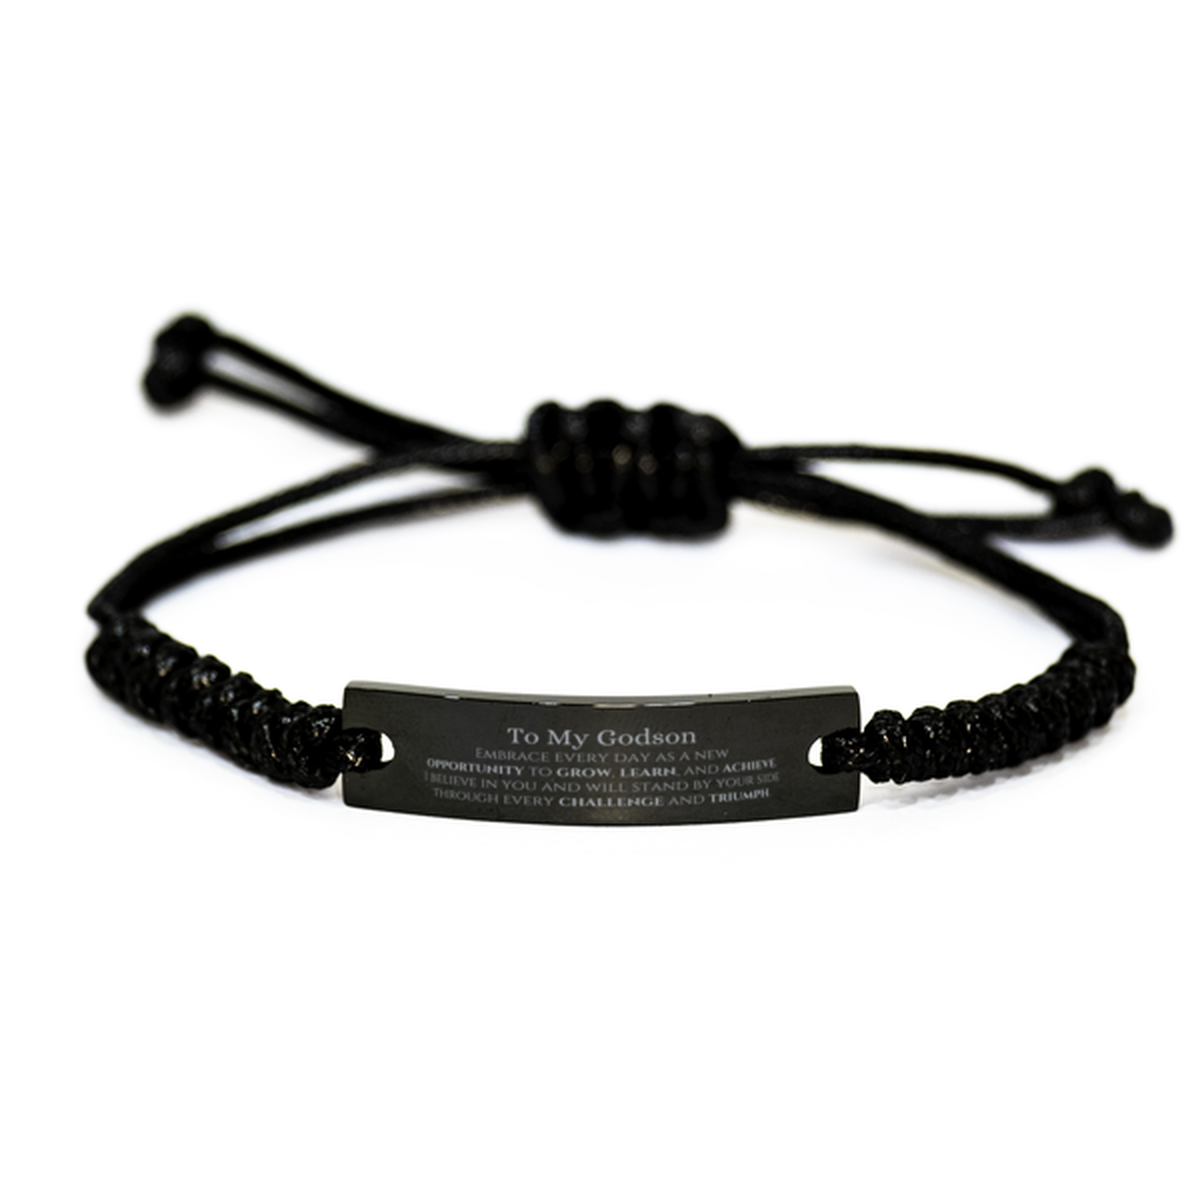 To My Godson Gifts, I believe in you and will stand by your side, Inspirational Black Rope Bracelet For Godson, Birthday Christmas Motivational Godson Gifts